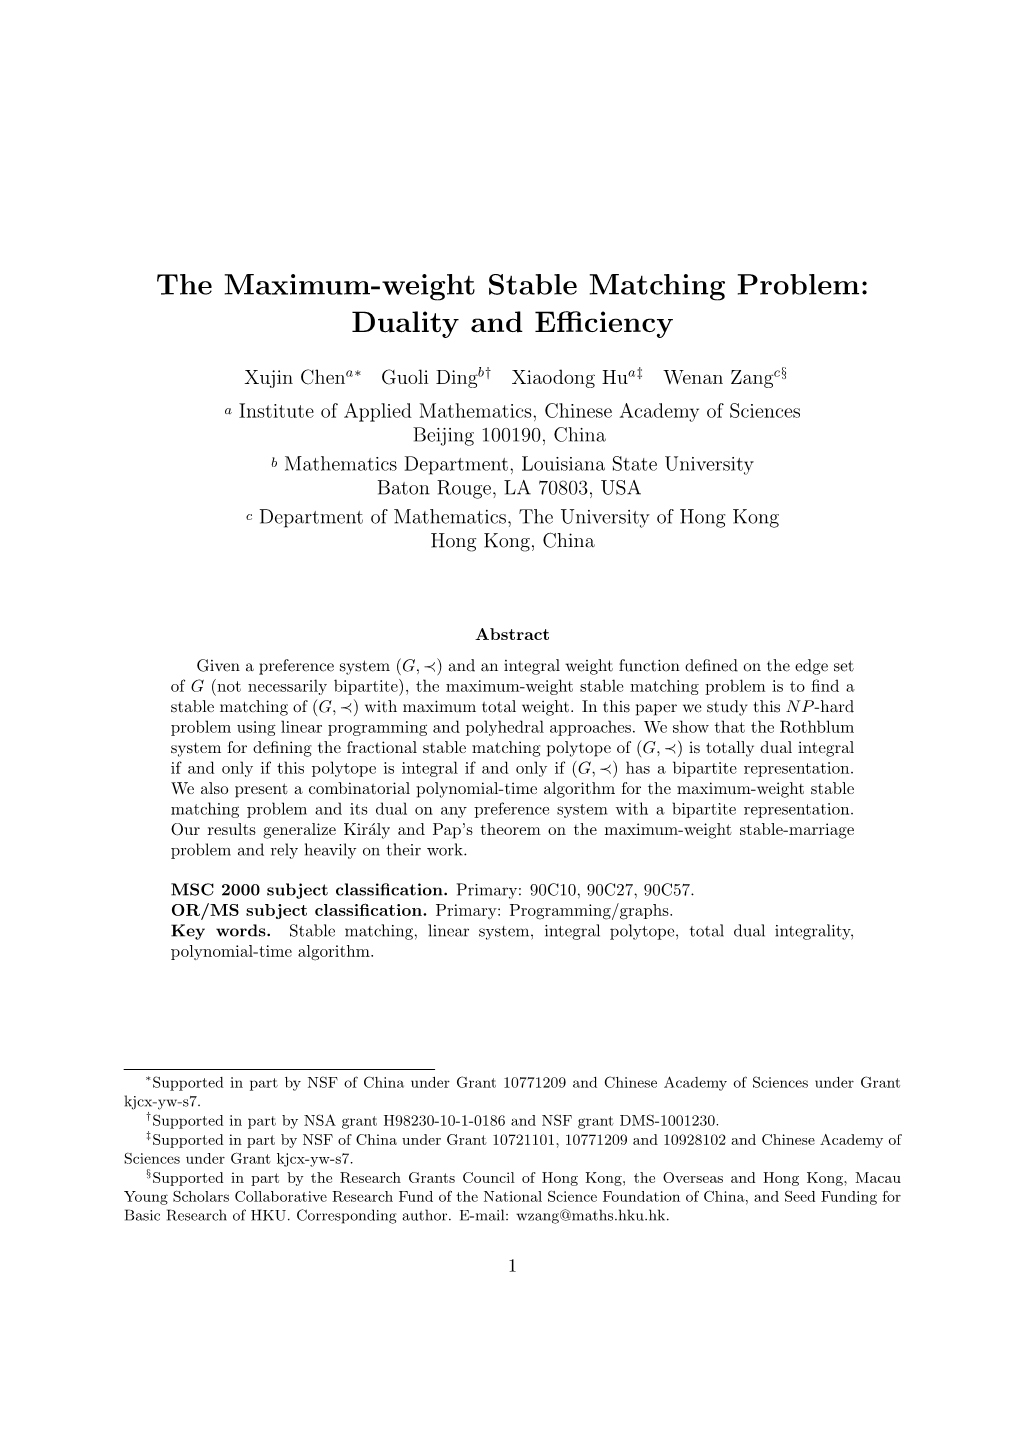 The Maximum-Weight Stable Matching Problem: Duality and Eﬃciency